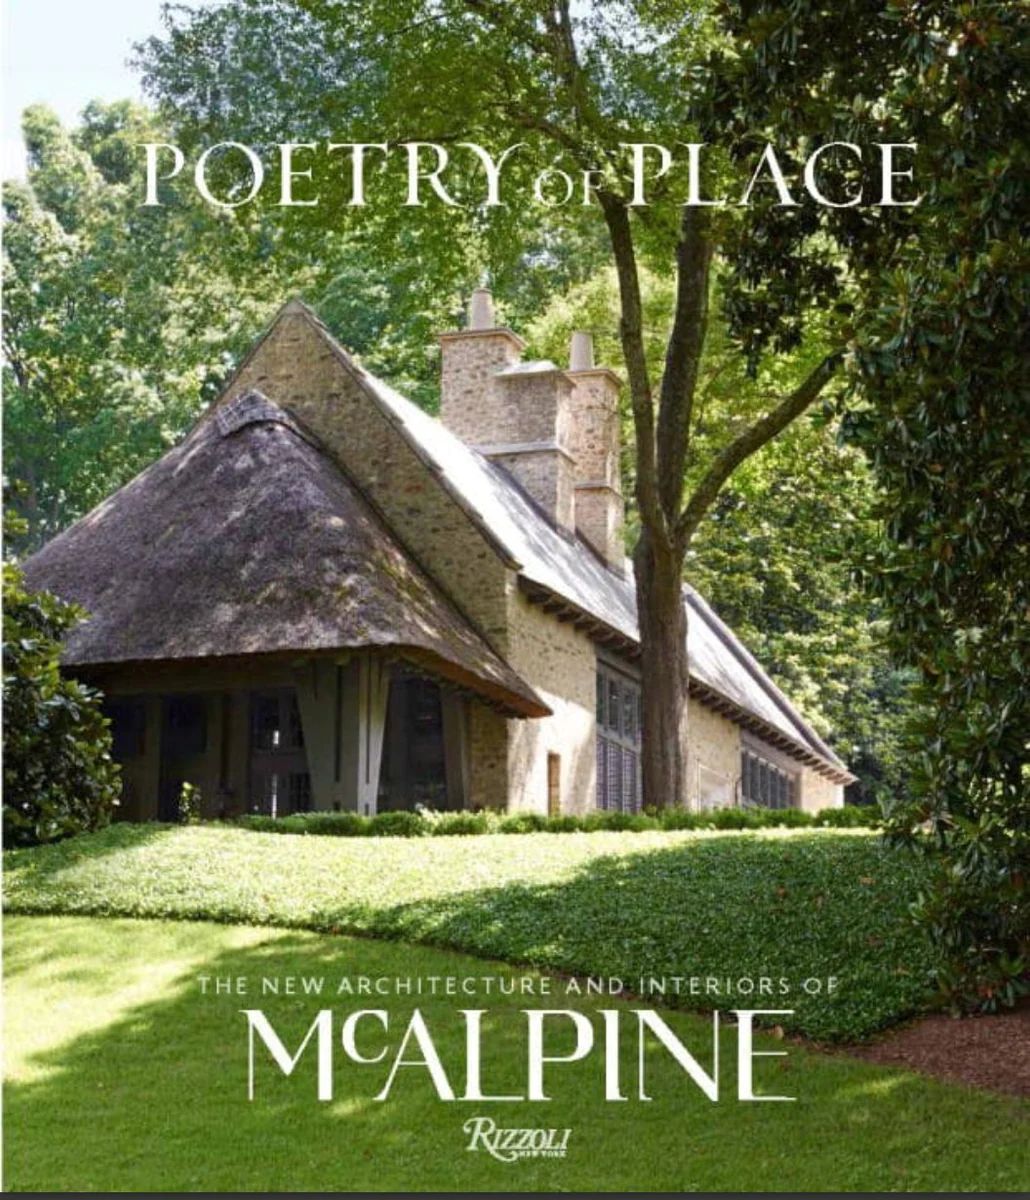 Poetry of Place: The New Architecture and Interiors of McAlpine Book | Outrageous Interiors + Design